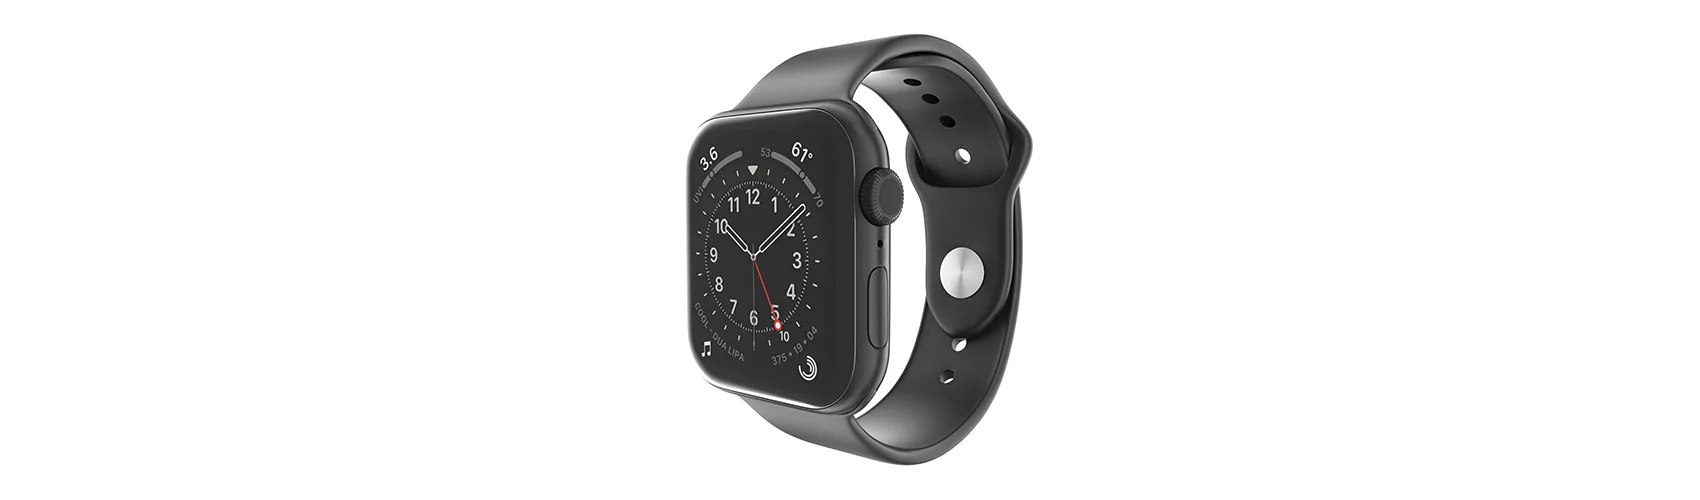 Apple Watch Series 6 44mm Space Gray Aluminum Case with Black Sport Band